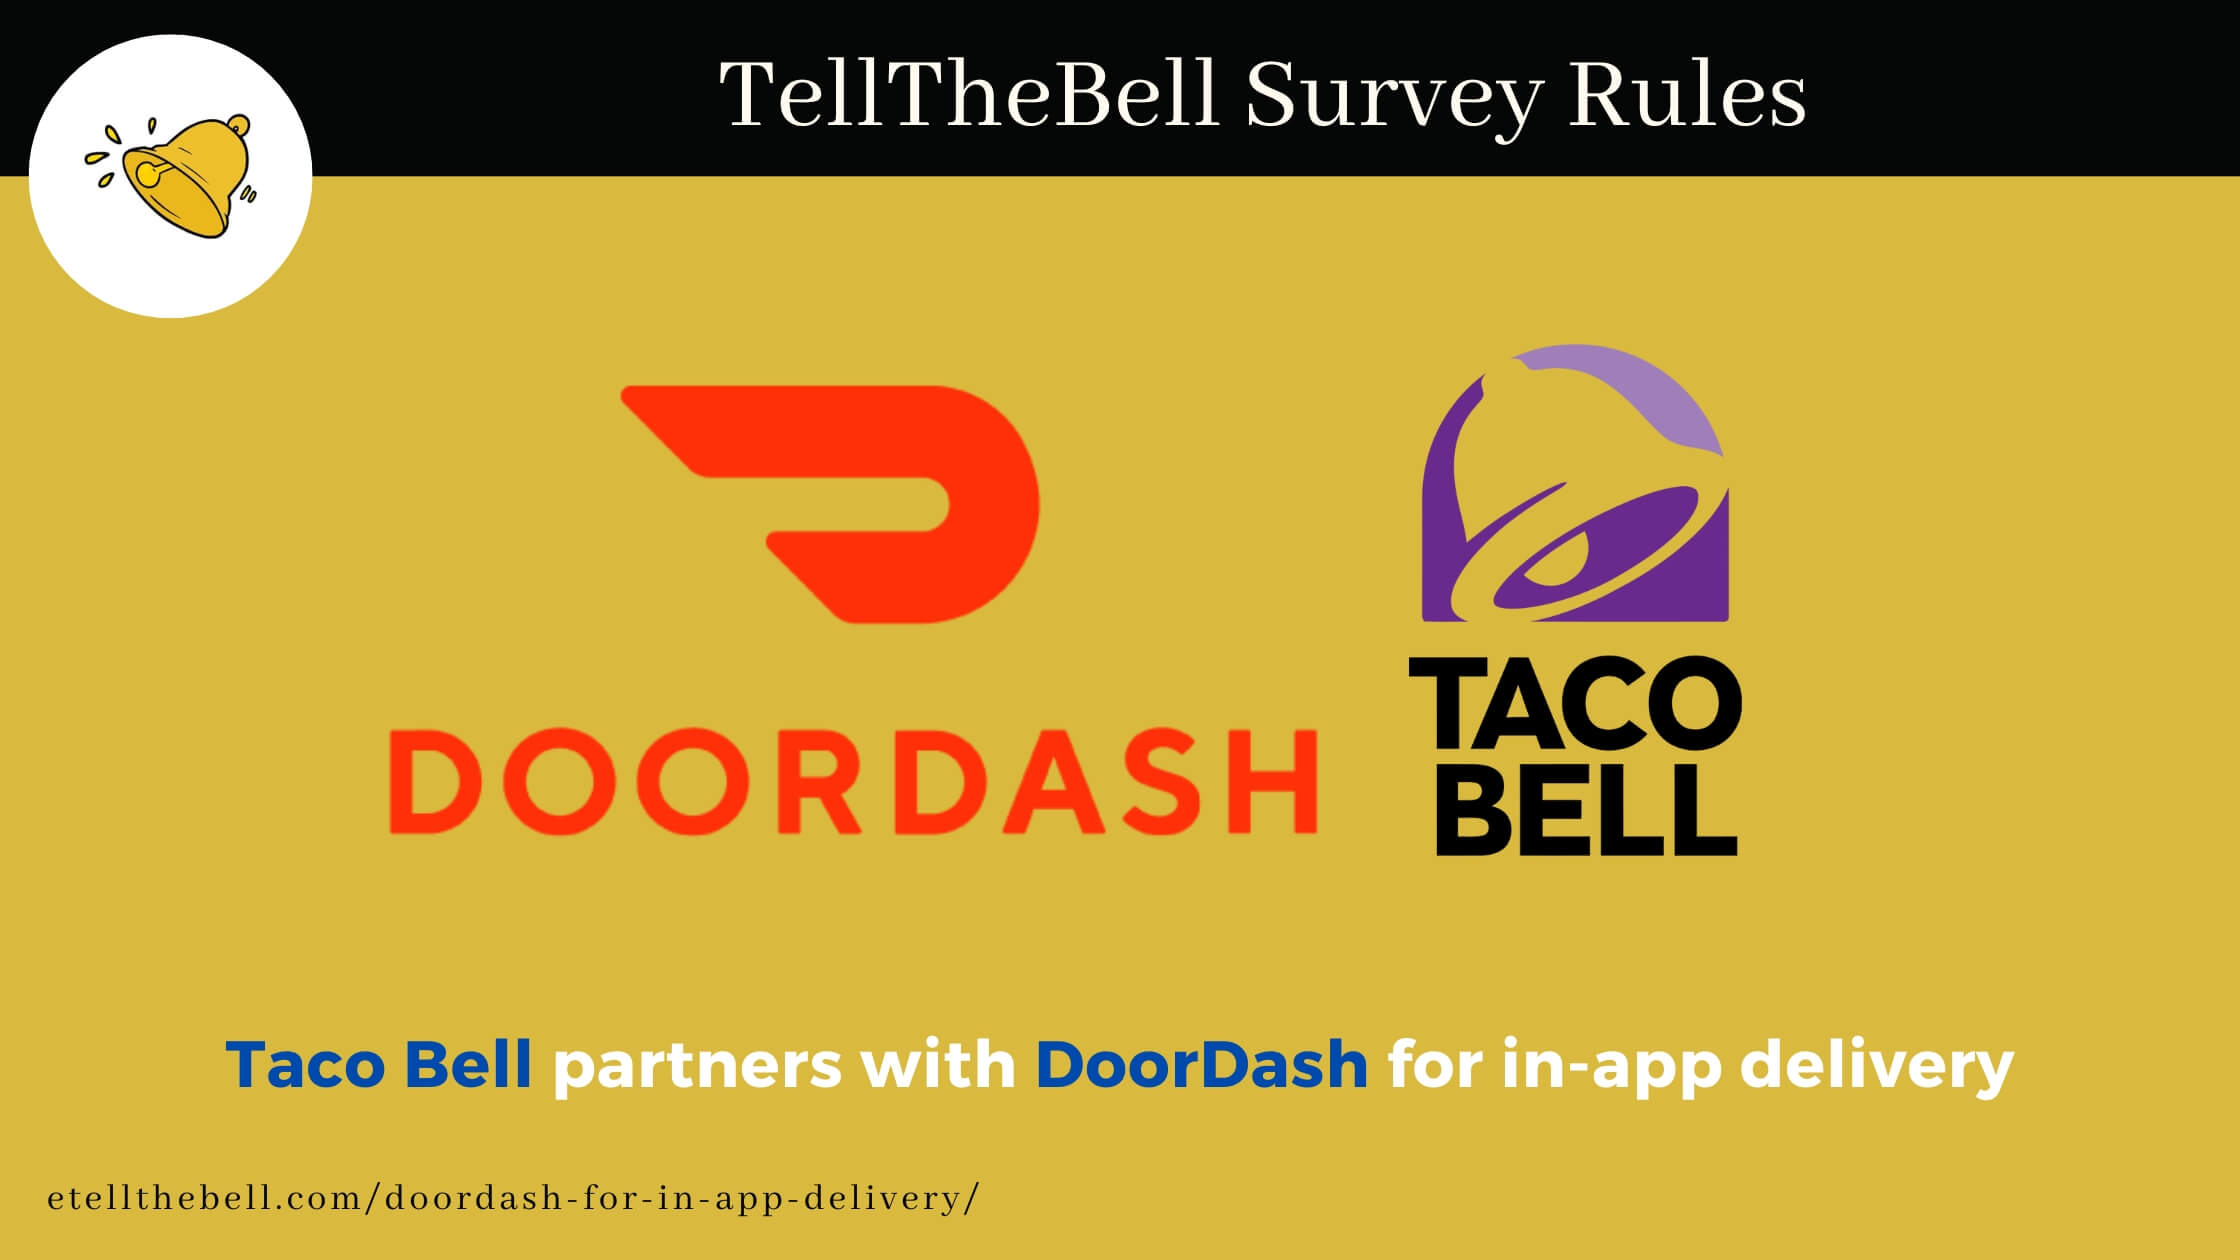 Taco Bell partners with DoorDash for in-app delivery